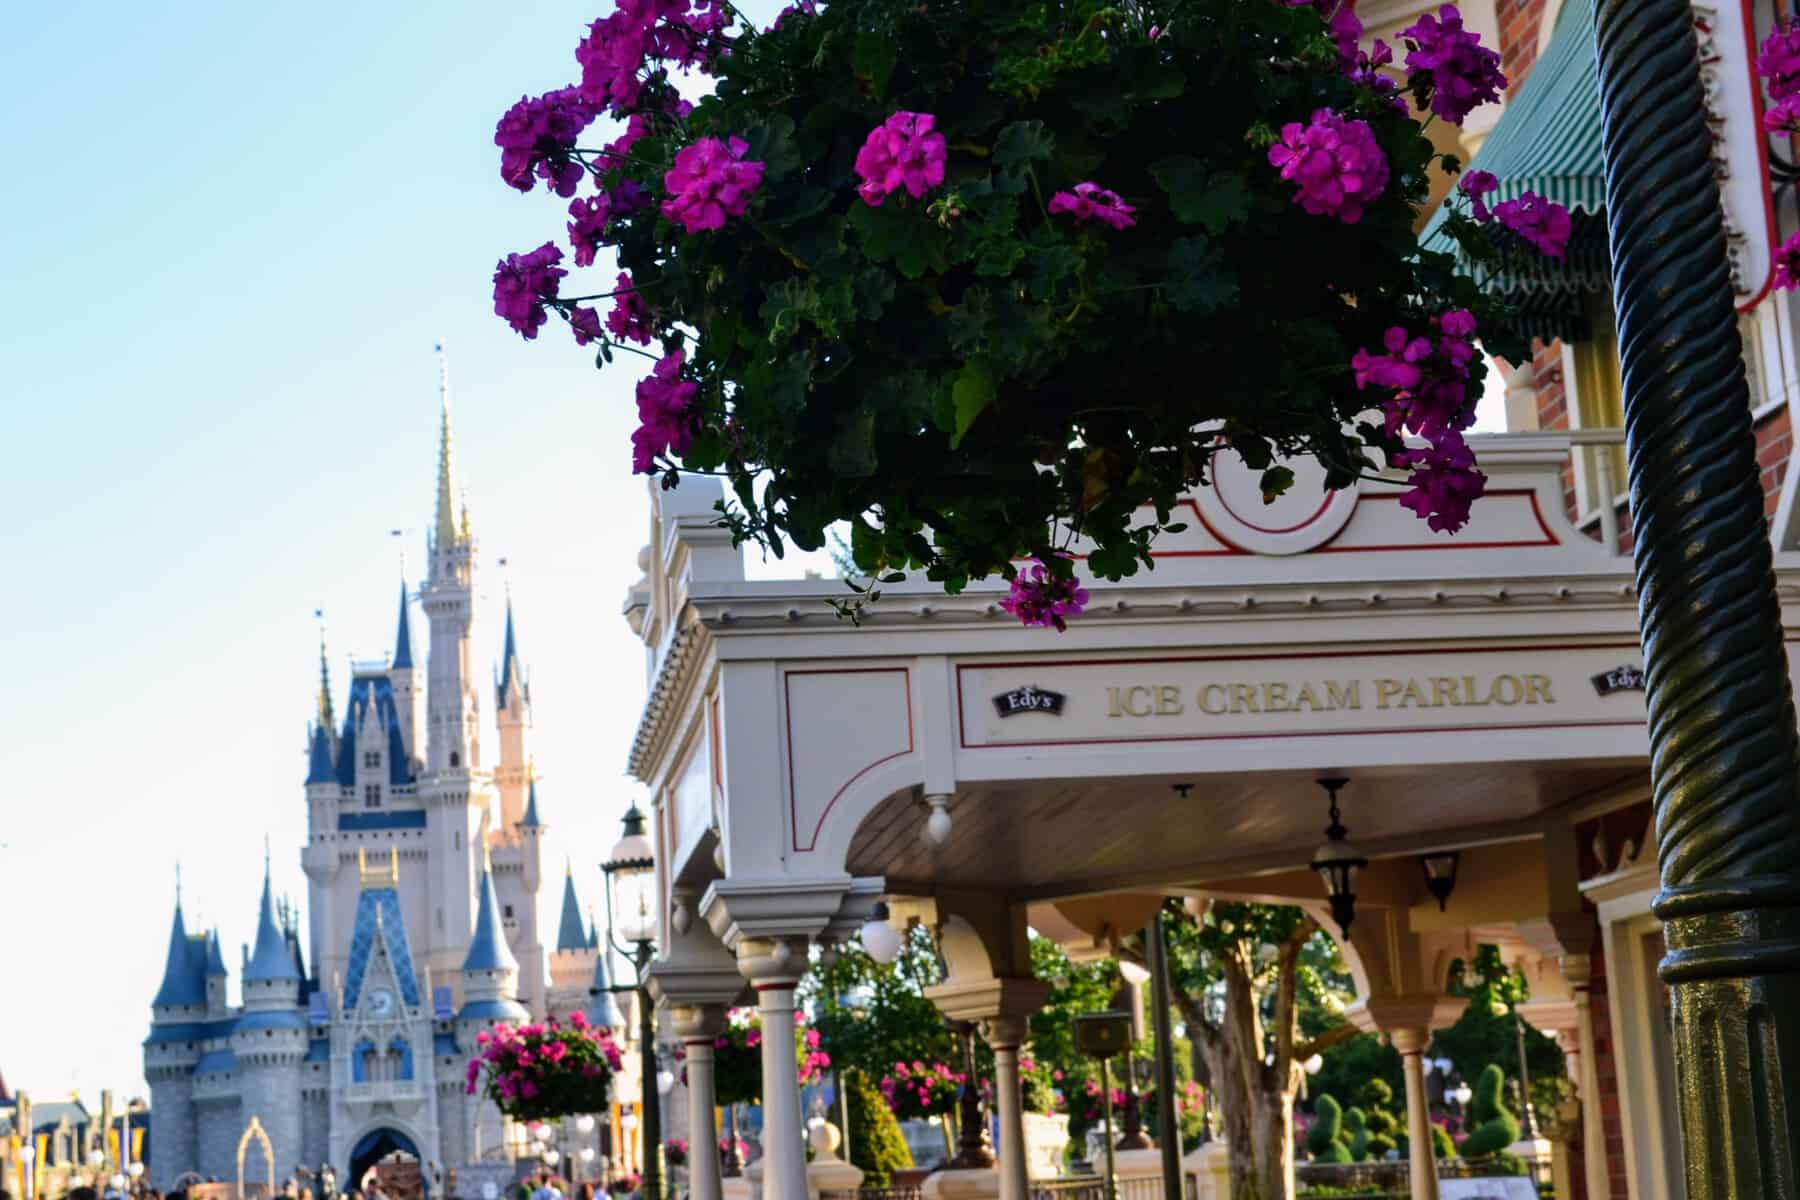 Our best tips for planning a short trip to Disney World